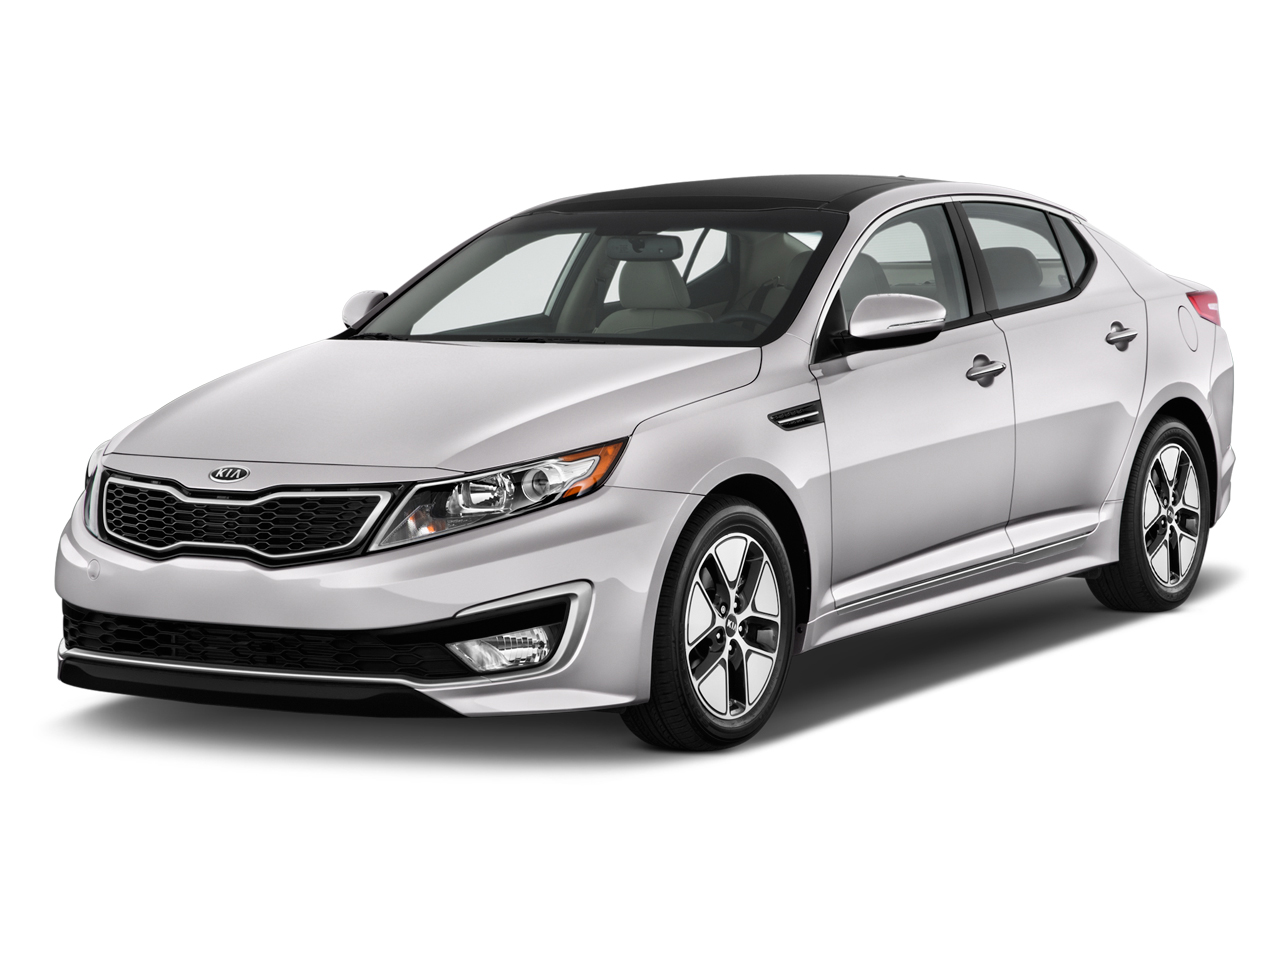 How big is the gas tank on a kia optima 2013 Kia Optima Review Ratings Specs Prices And Photos The Car Connection